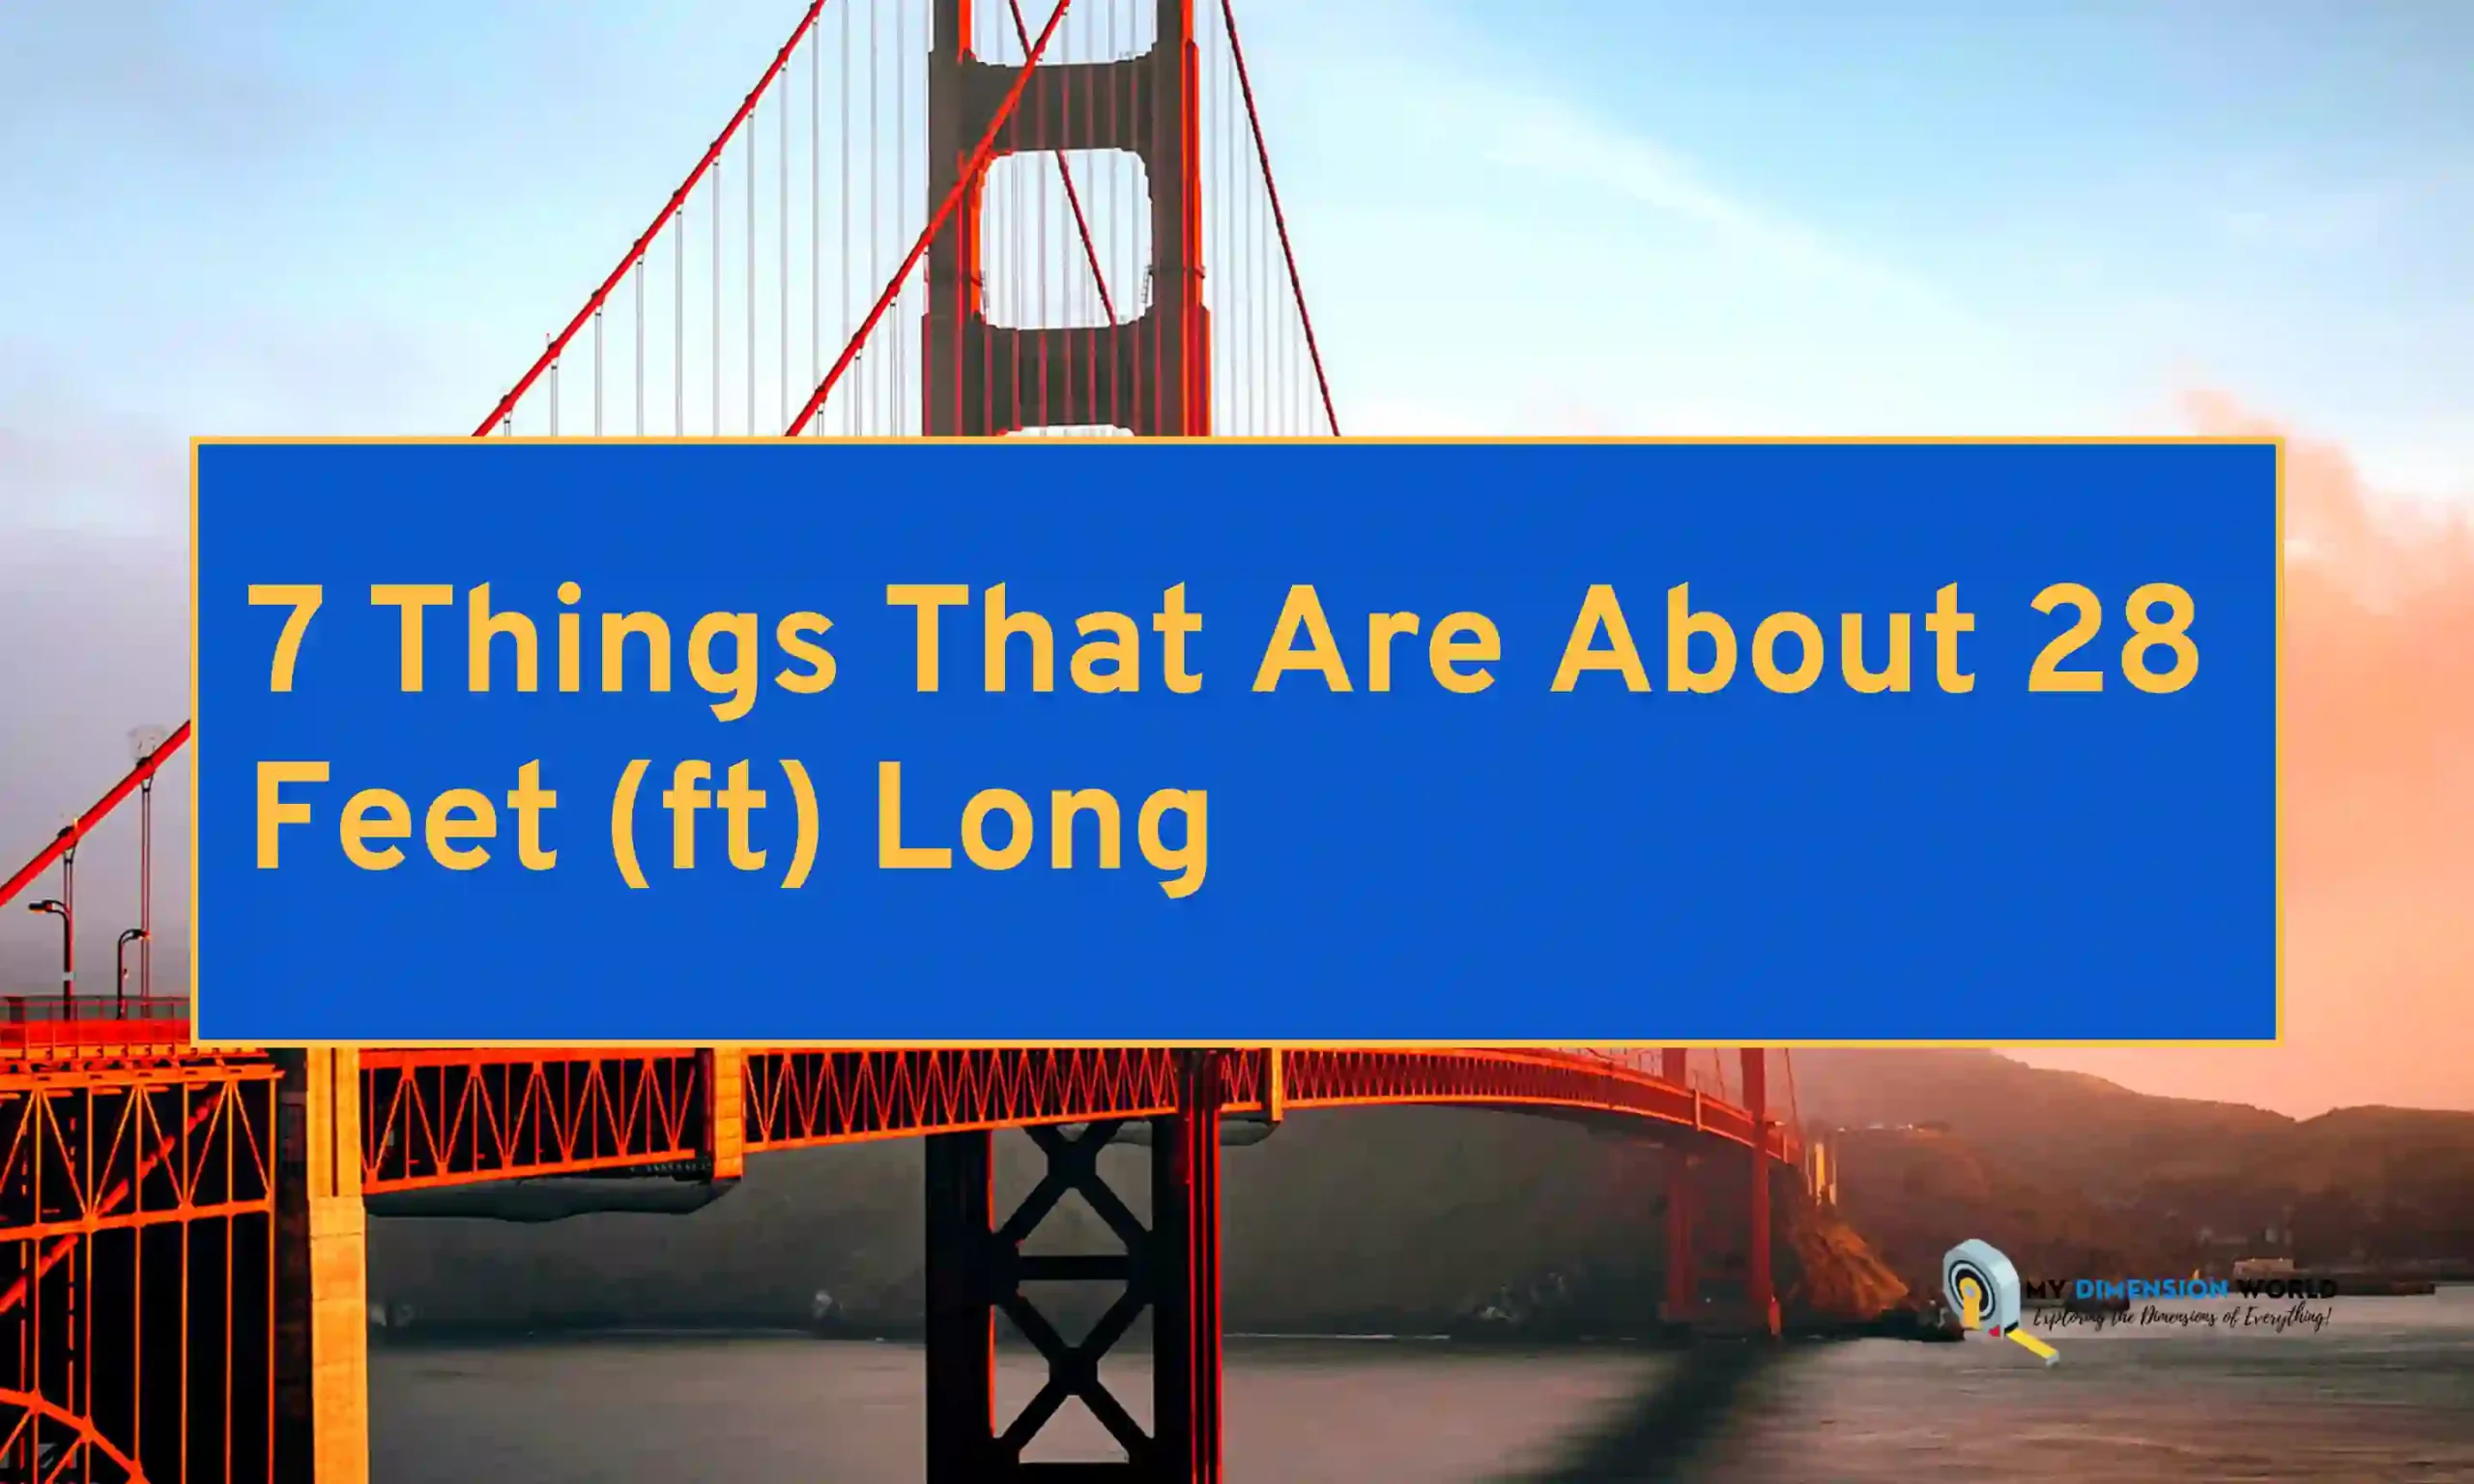 7 Things That Are About 28 Feet (ft) Long